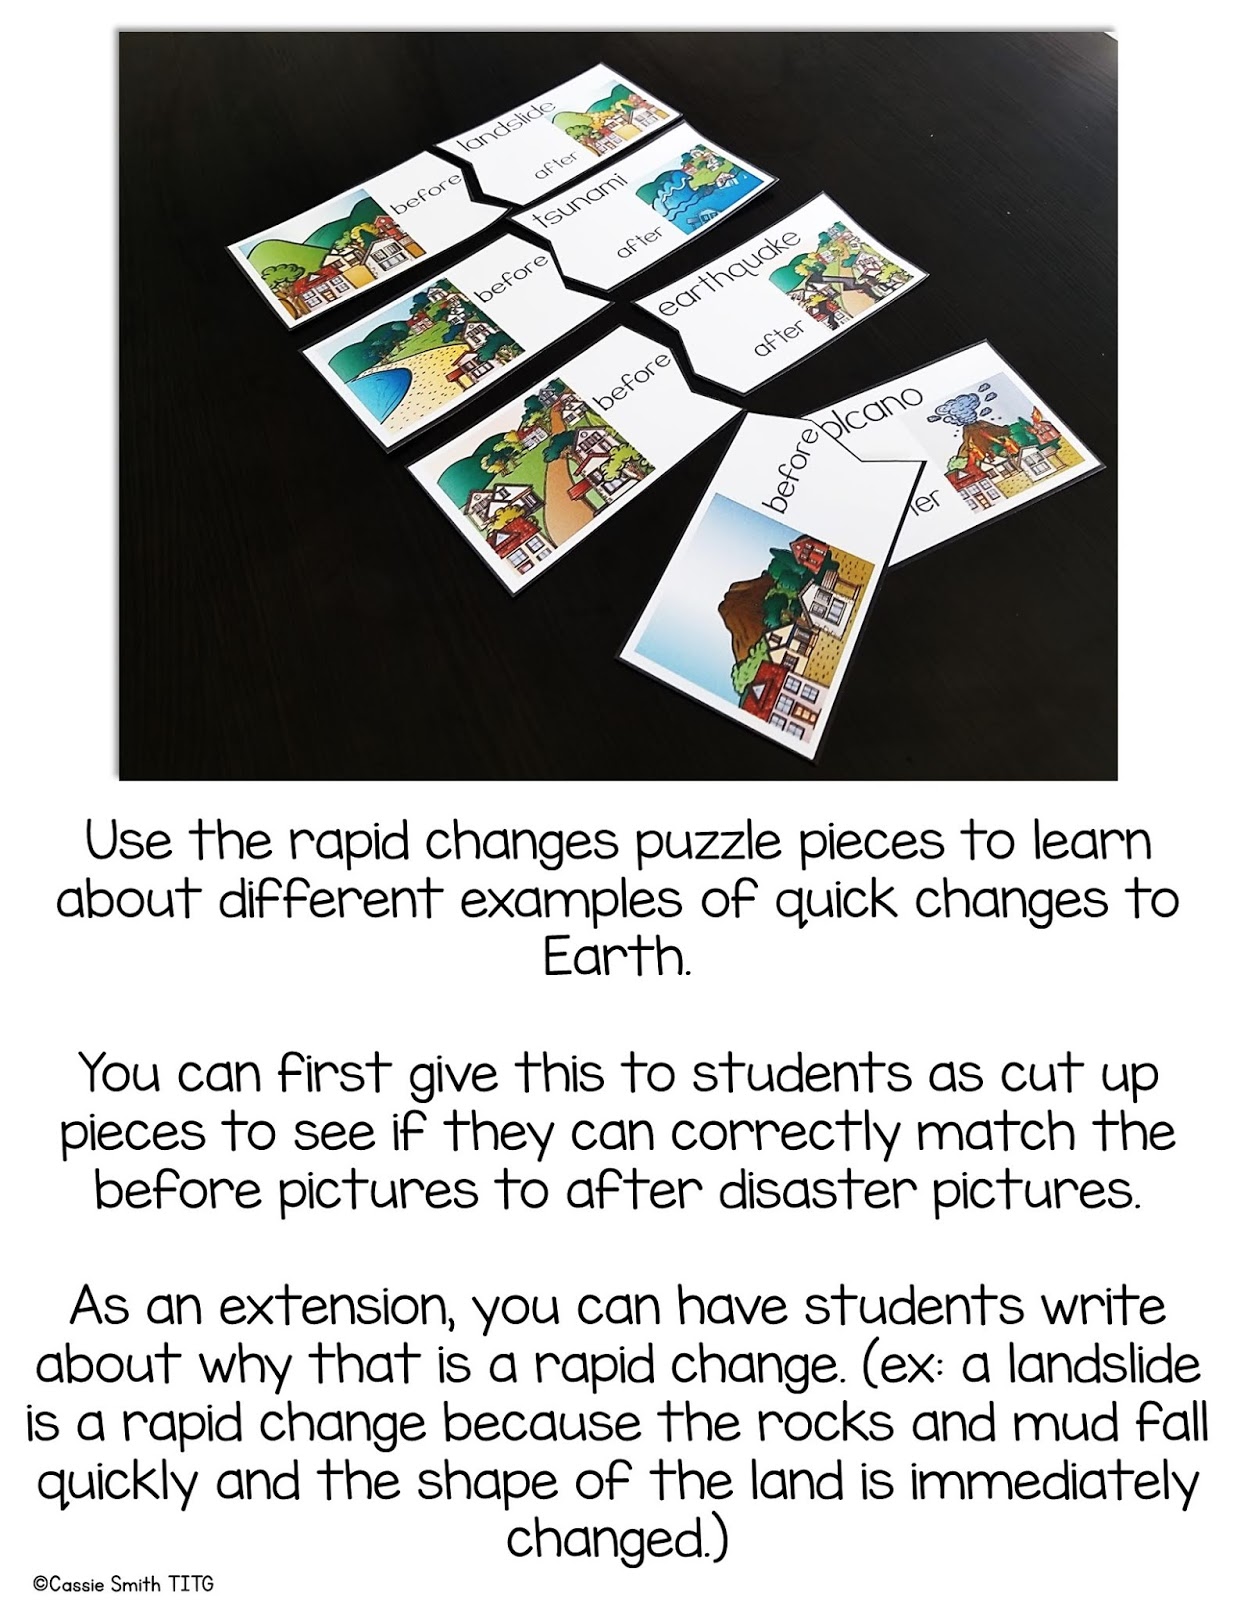 Earth's Systems: Processes that Shape the Earth 2nd Grade NGSS